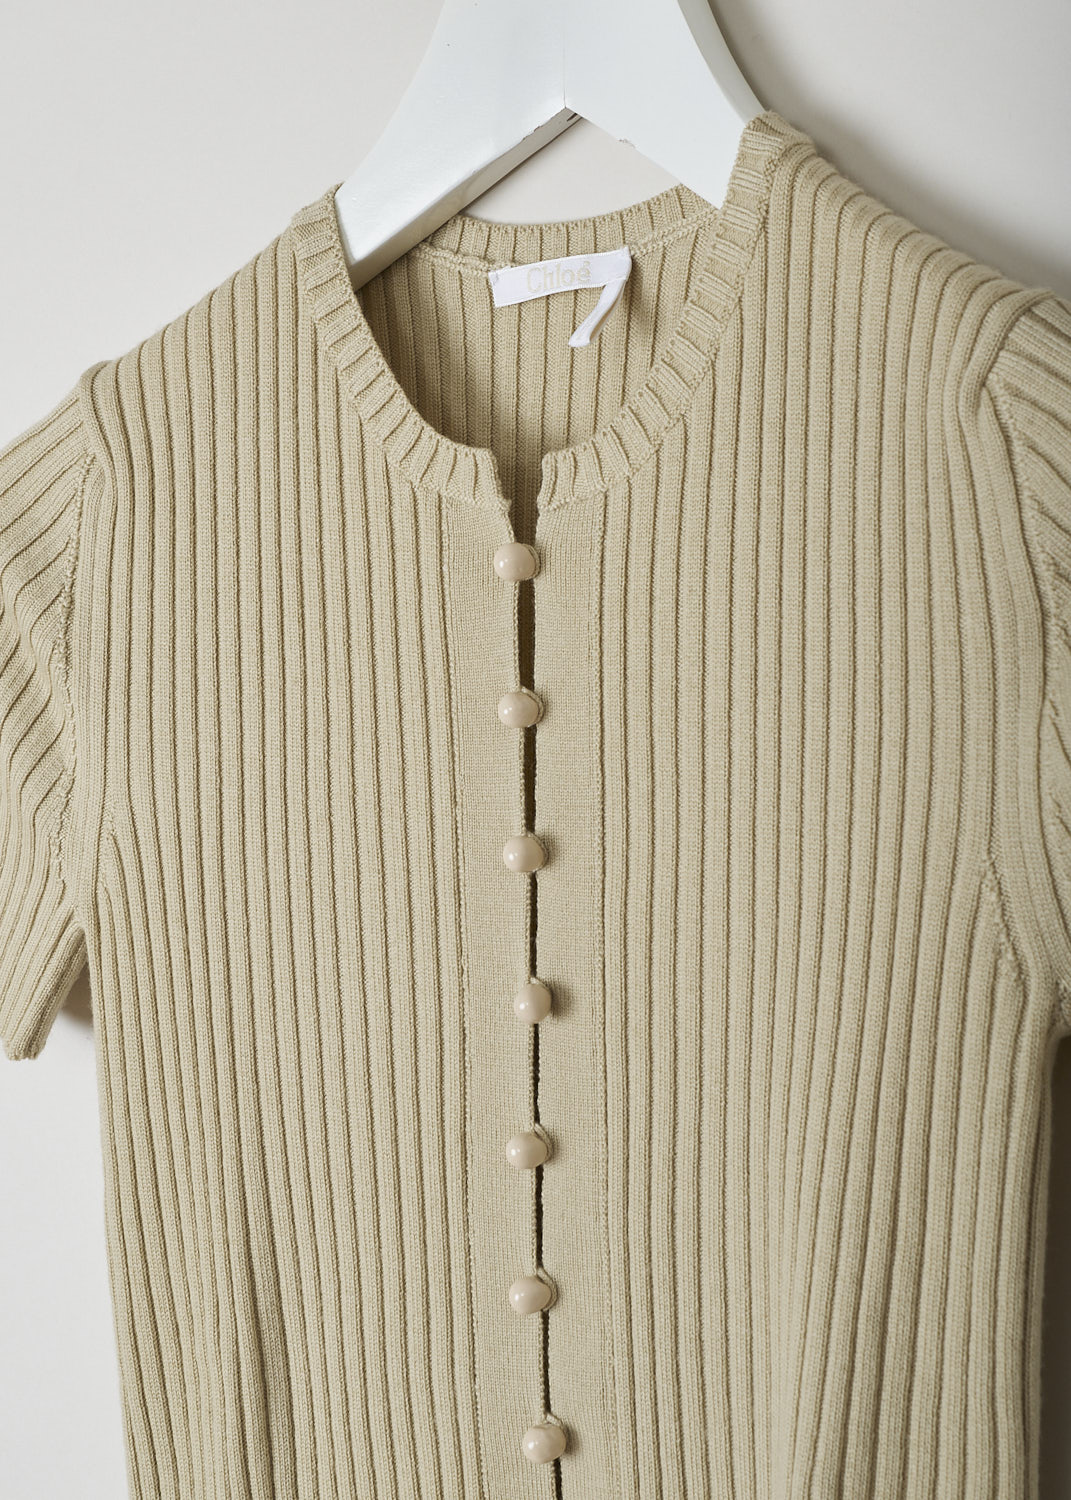 CHLOÃ‰, BEIGE RIBBED TOP, CHC22UMP3865020M_PASTEL_PINK, Beige, Detail, This beige ribbed top has a round neckline, short sleeves and a placket with functional ball buttons that go down the front to about midway. The top has an elongated cut.
